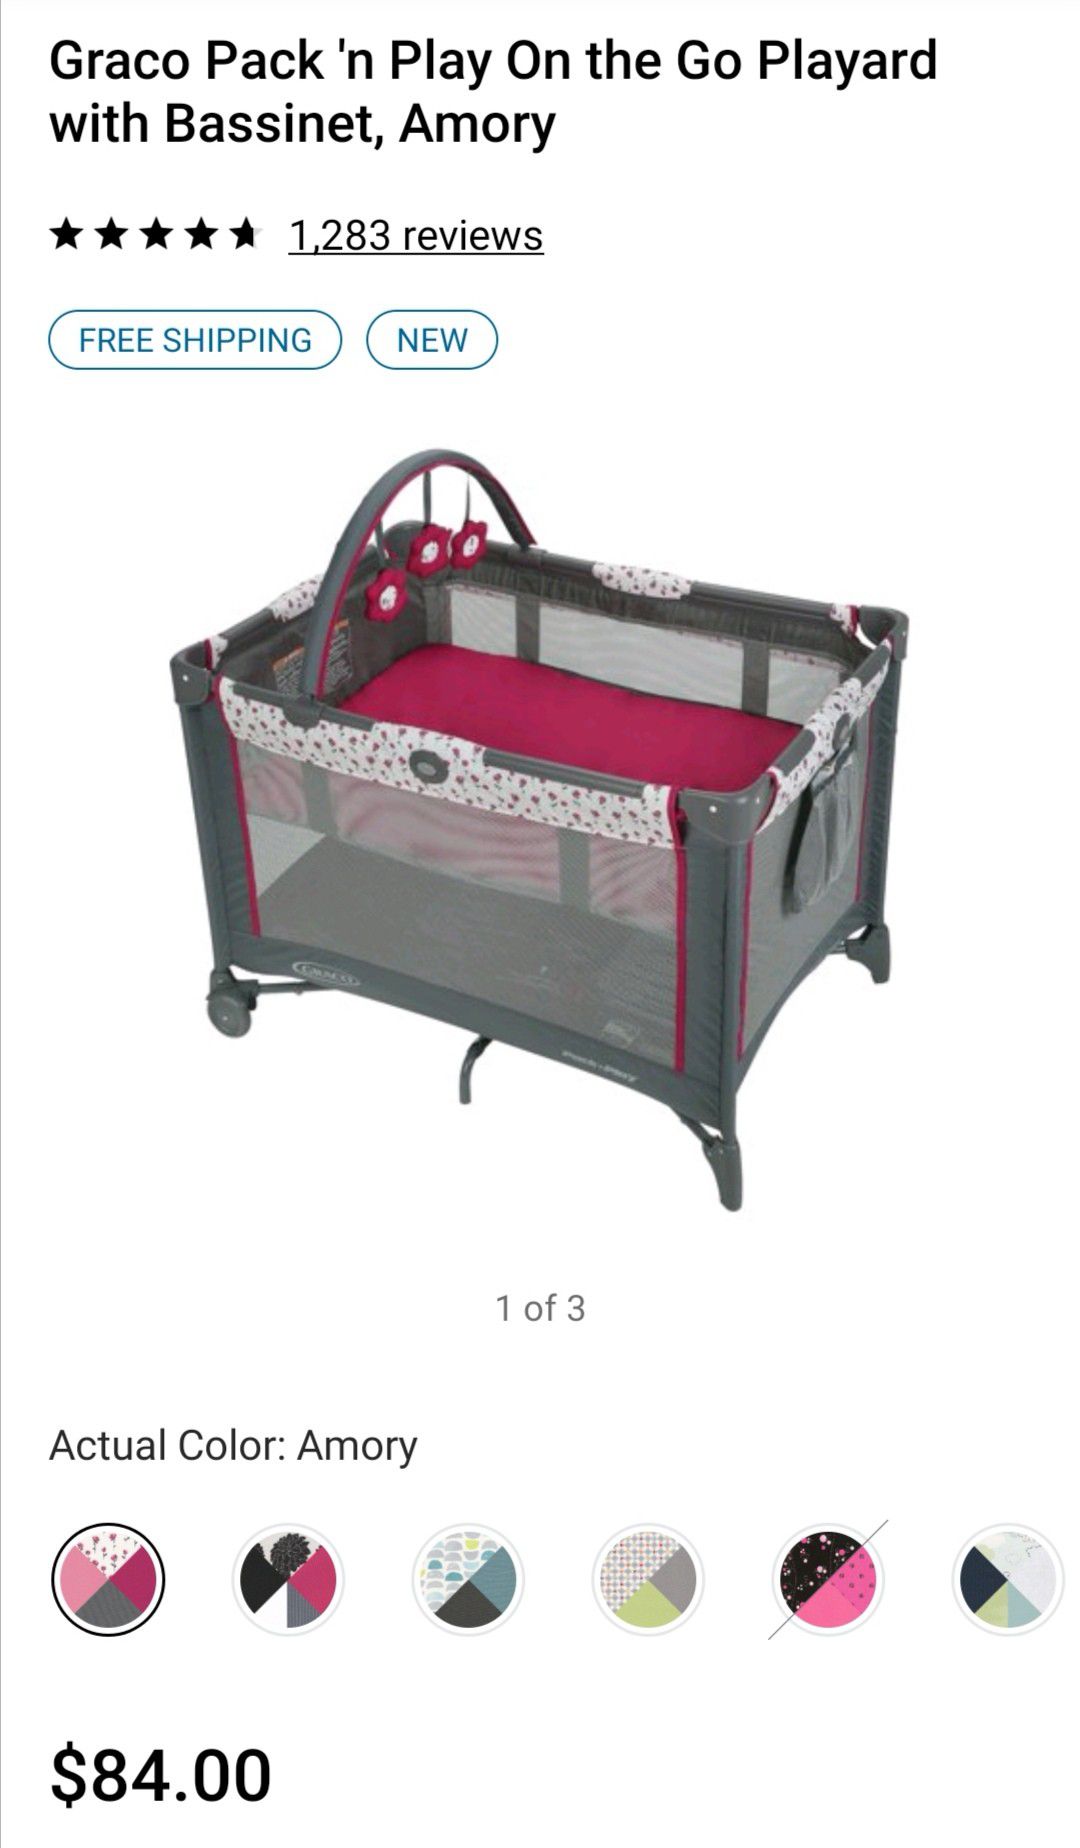 Graco pack n play used for 2 months